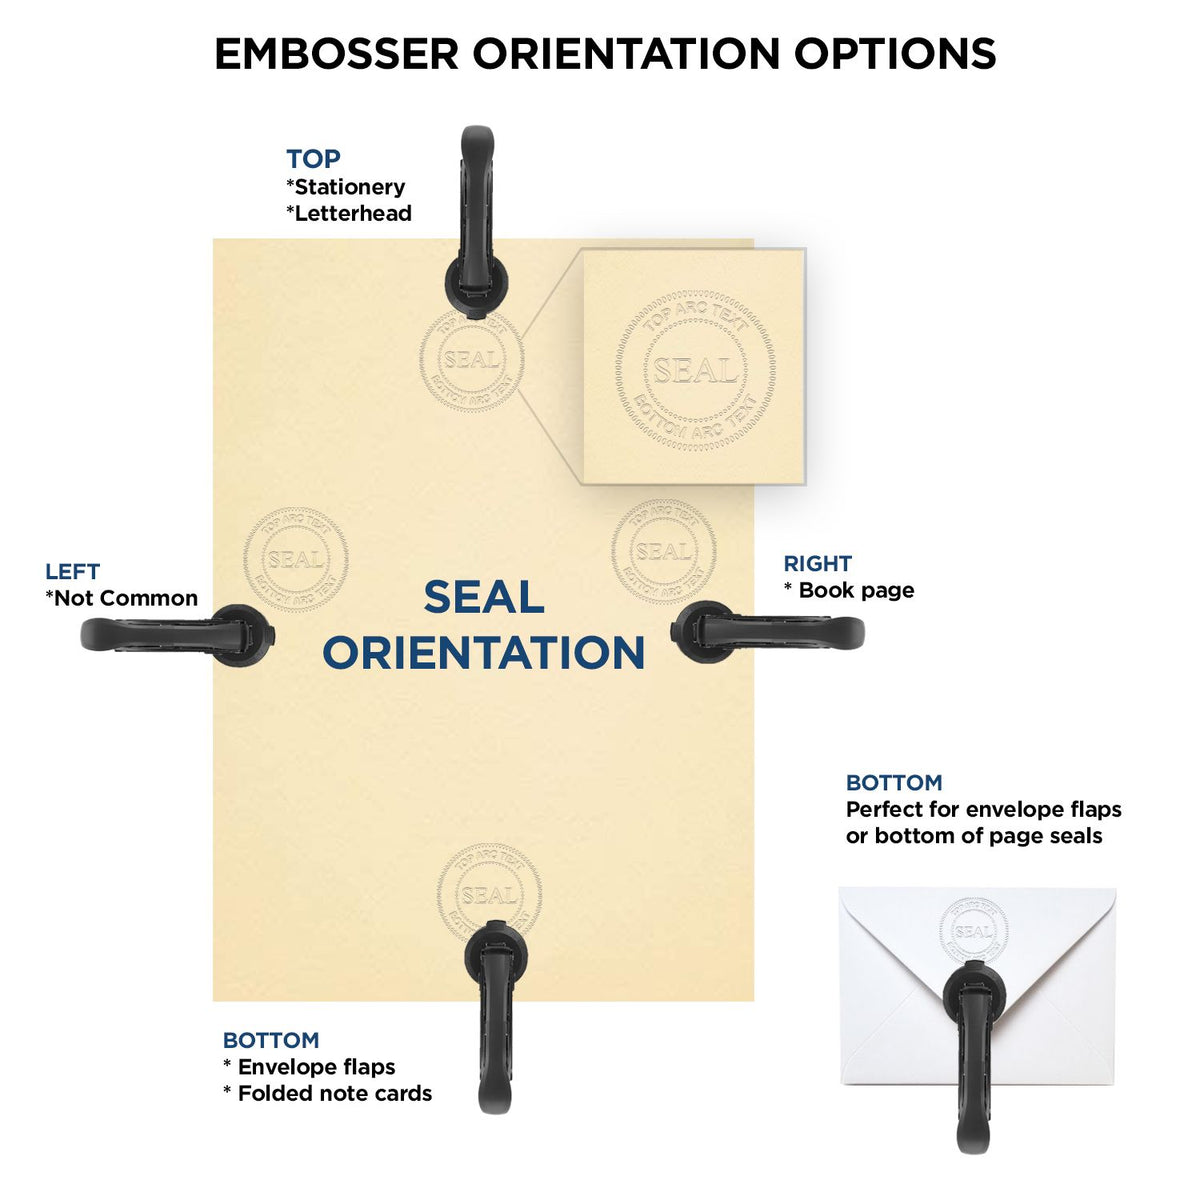 An infographic for the Maine Geologist Desk Seal showing embosser orientation, this is showing examples of a top, bottom, right and left insert.